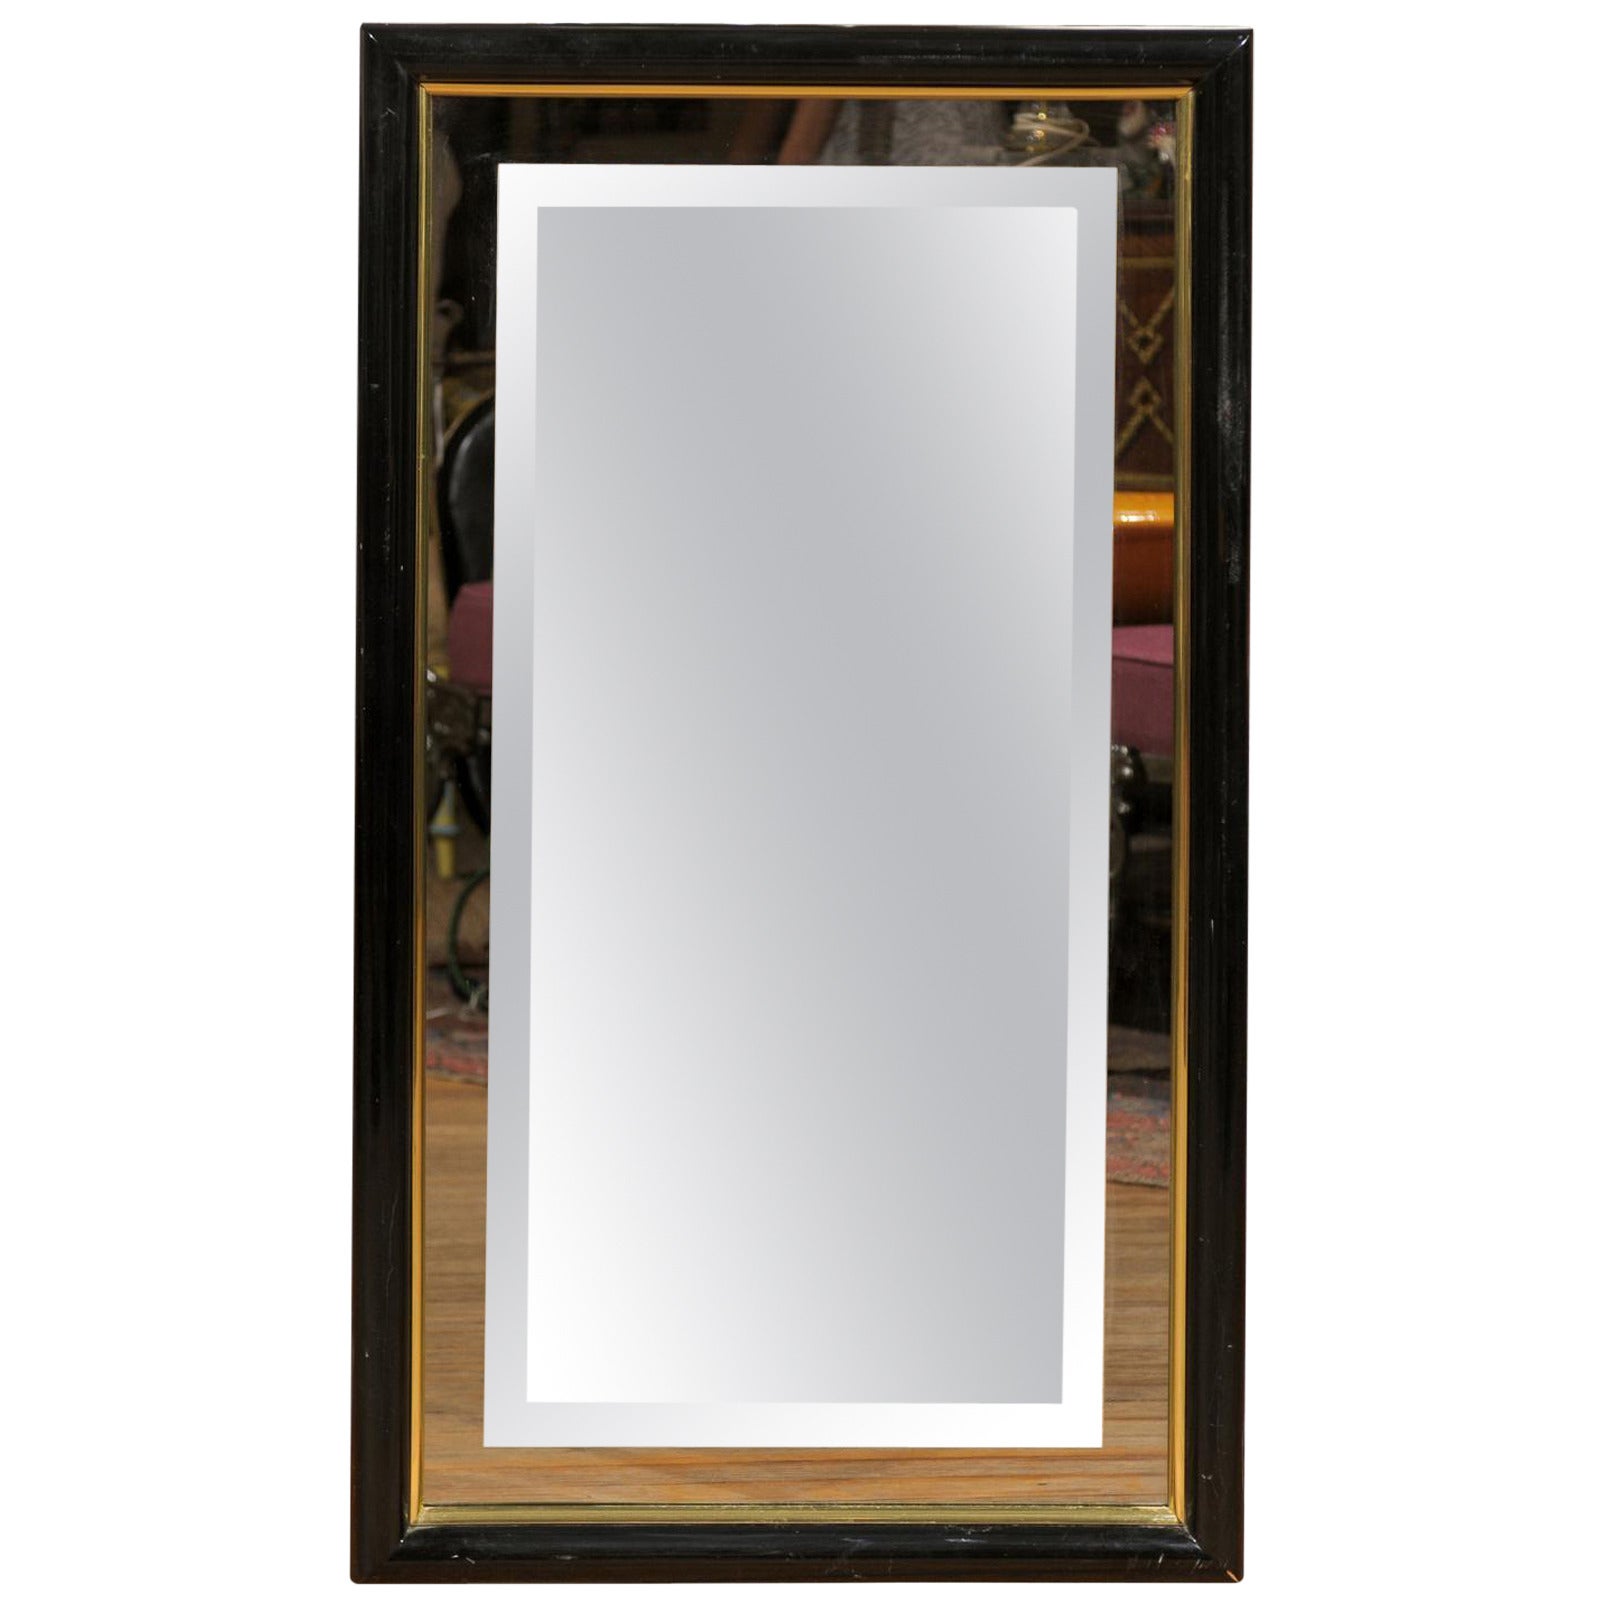 Smoked and Beveled Glass Wall Mirror in a Black and Brass Frame